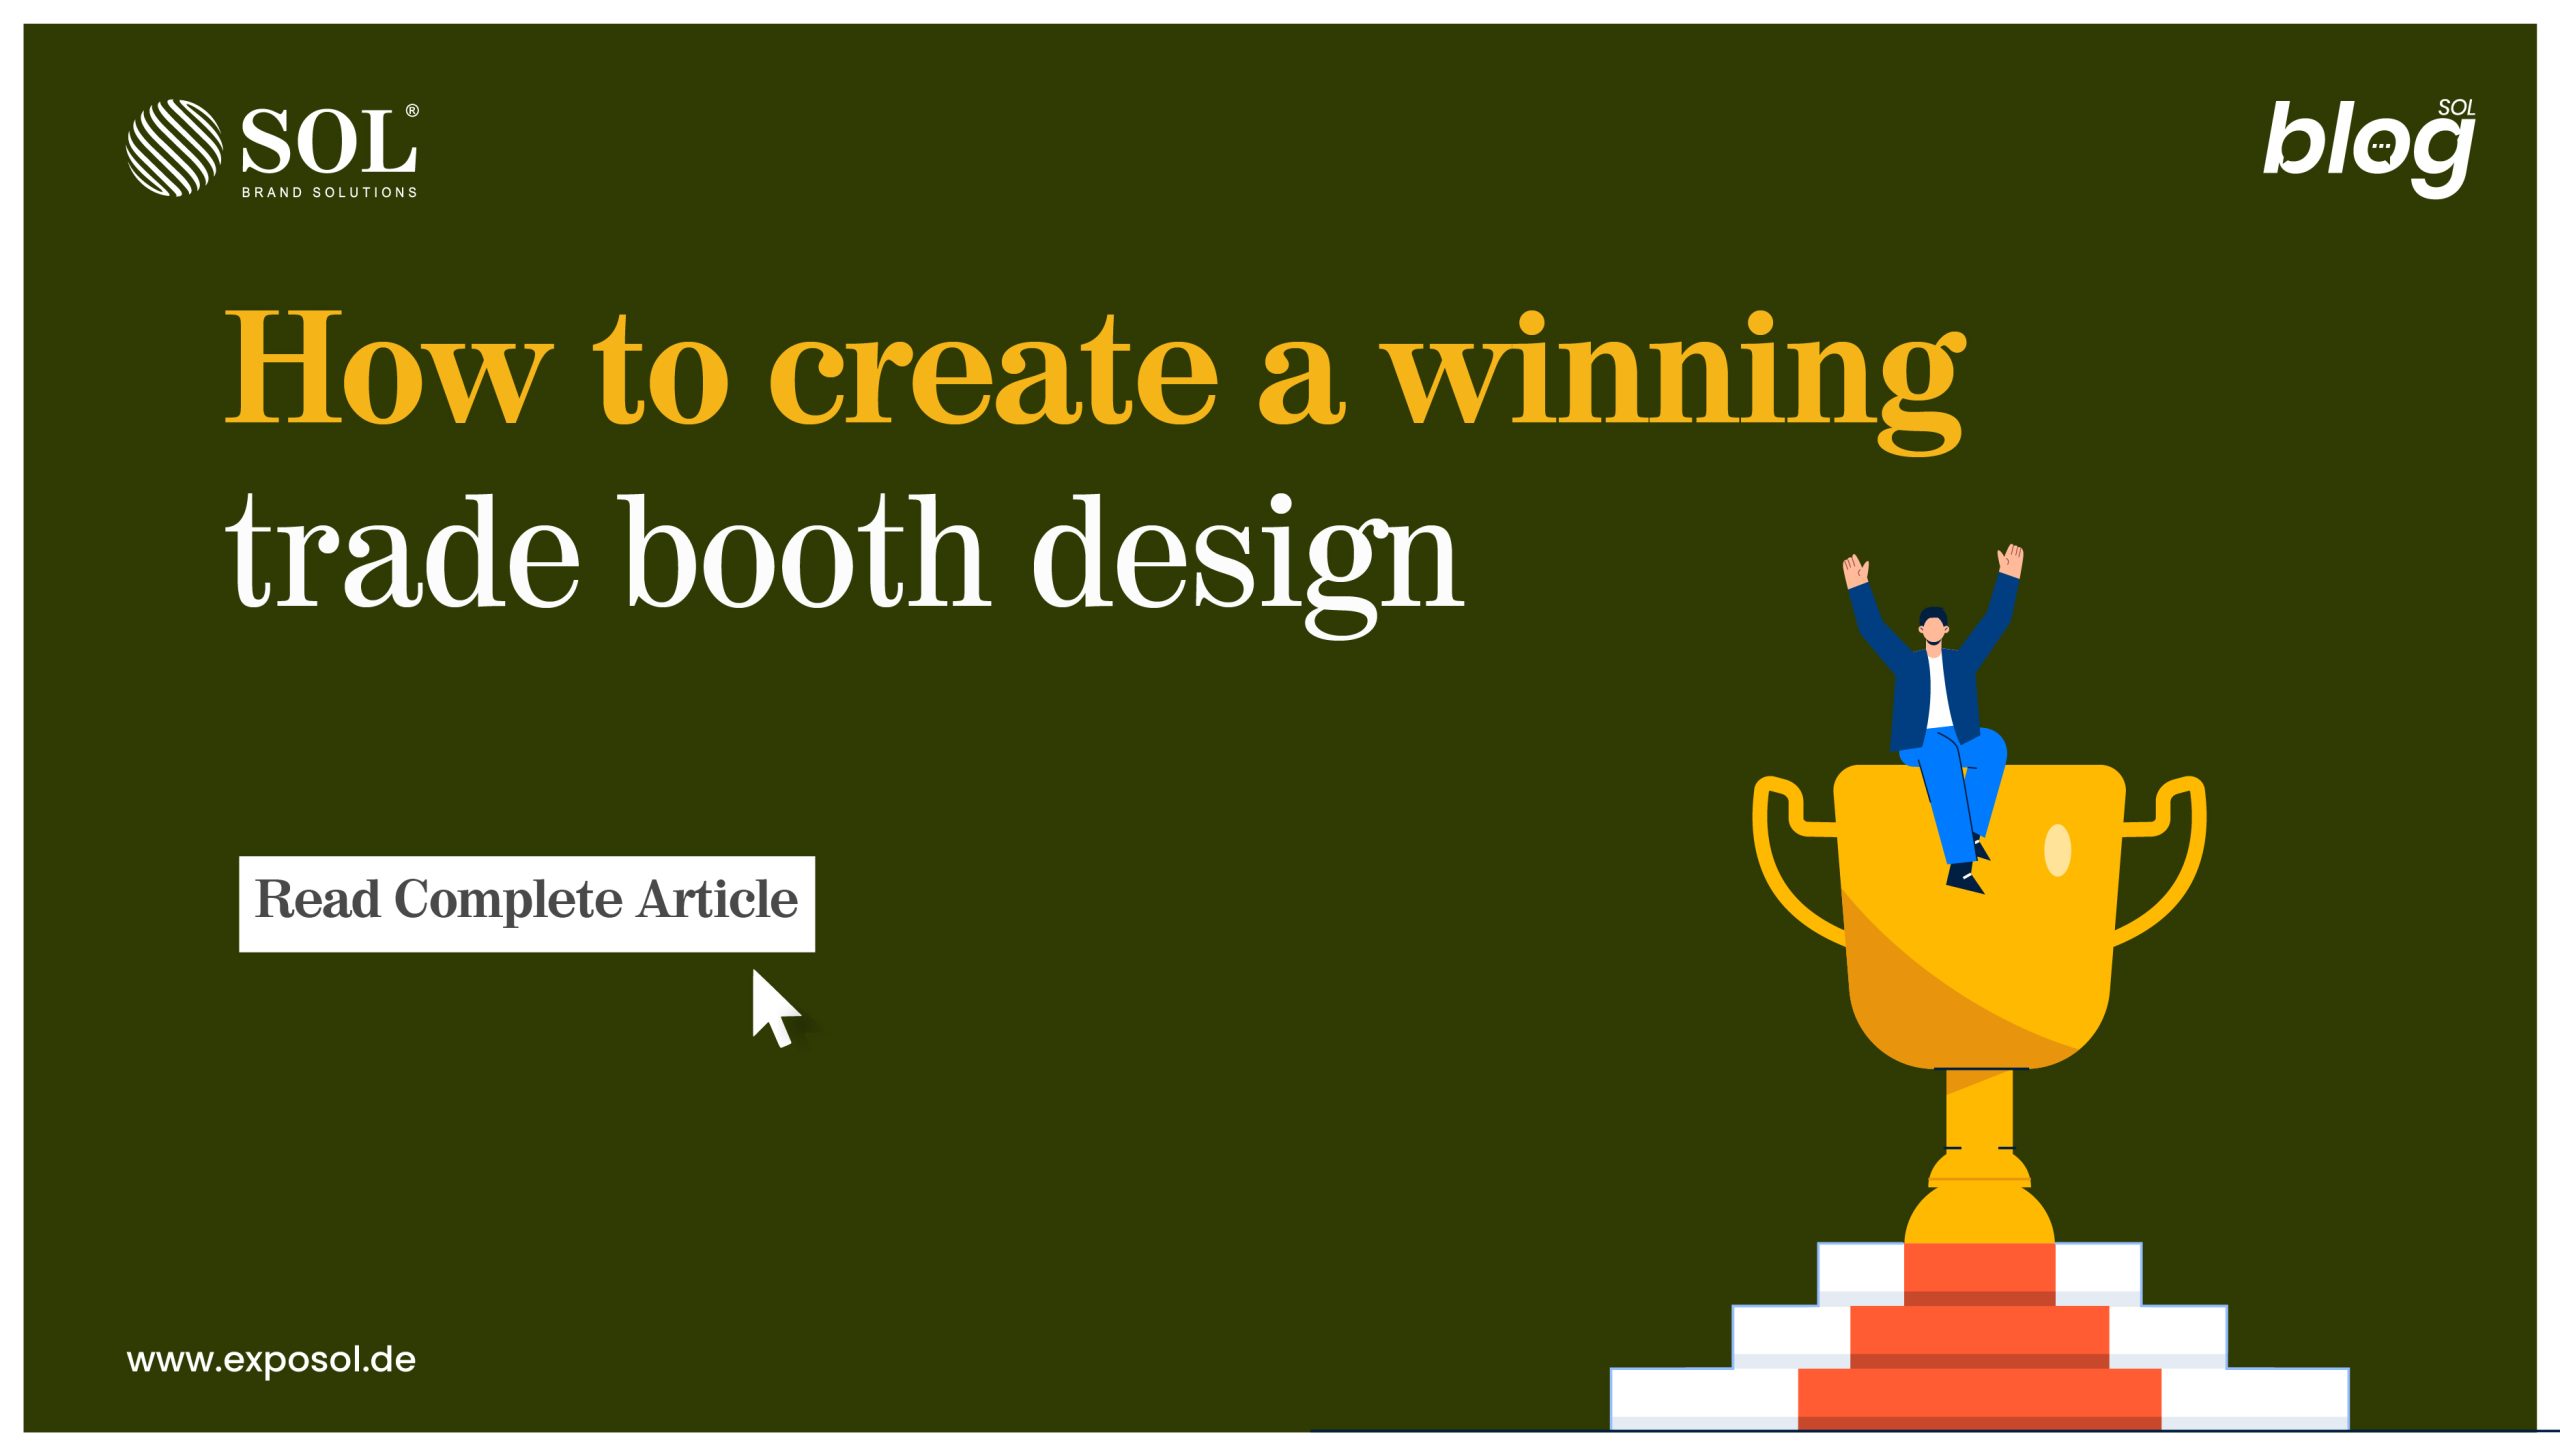 HOW TO CREATE A WINNING EXPO BOOTH DESIGN?